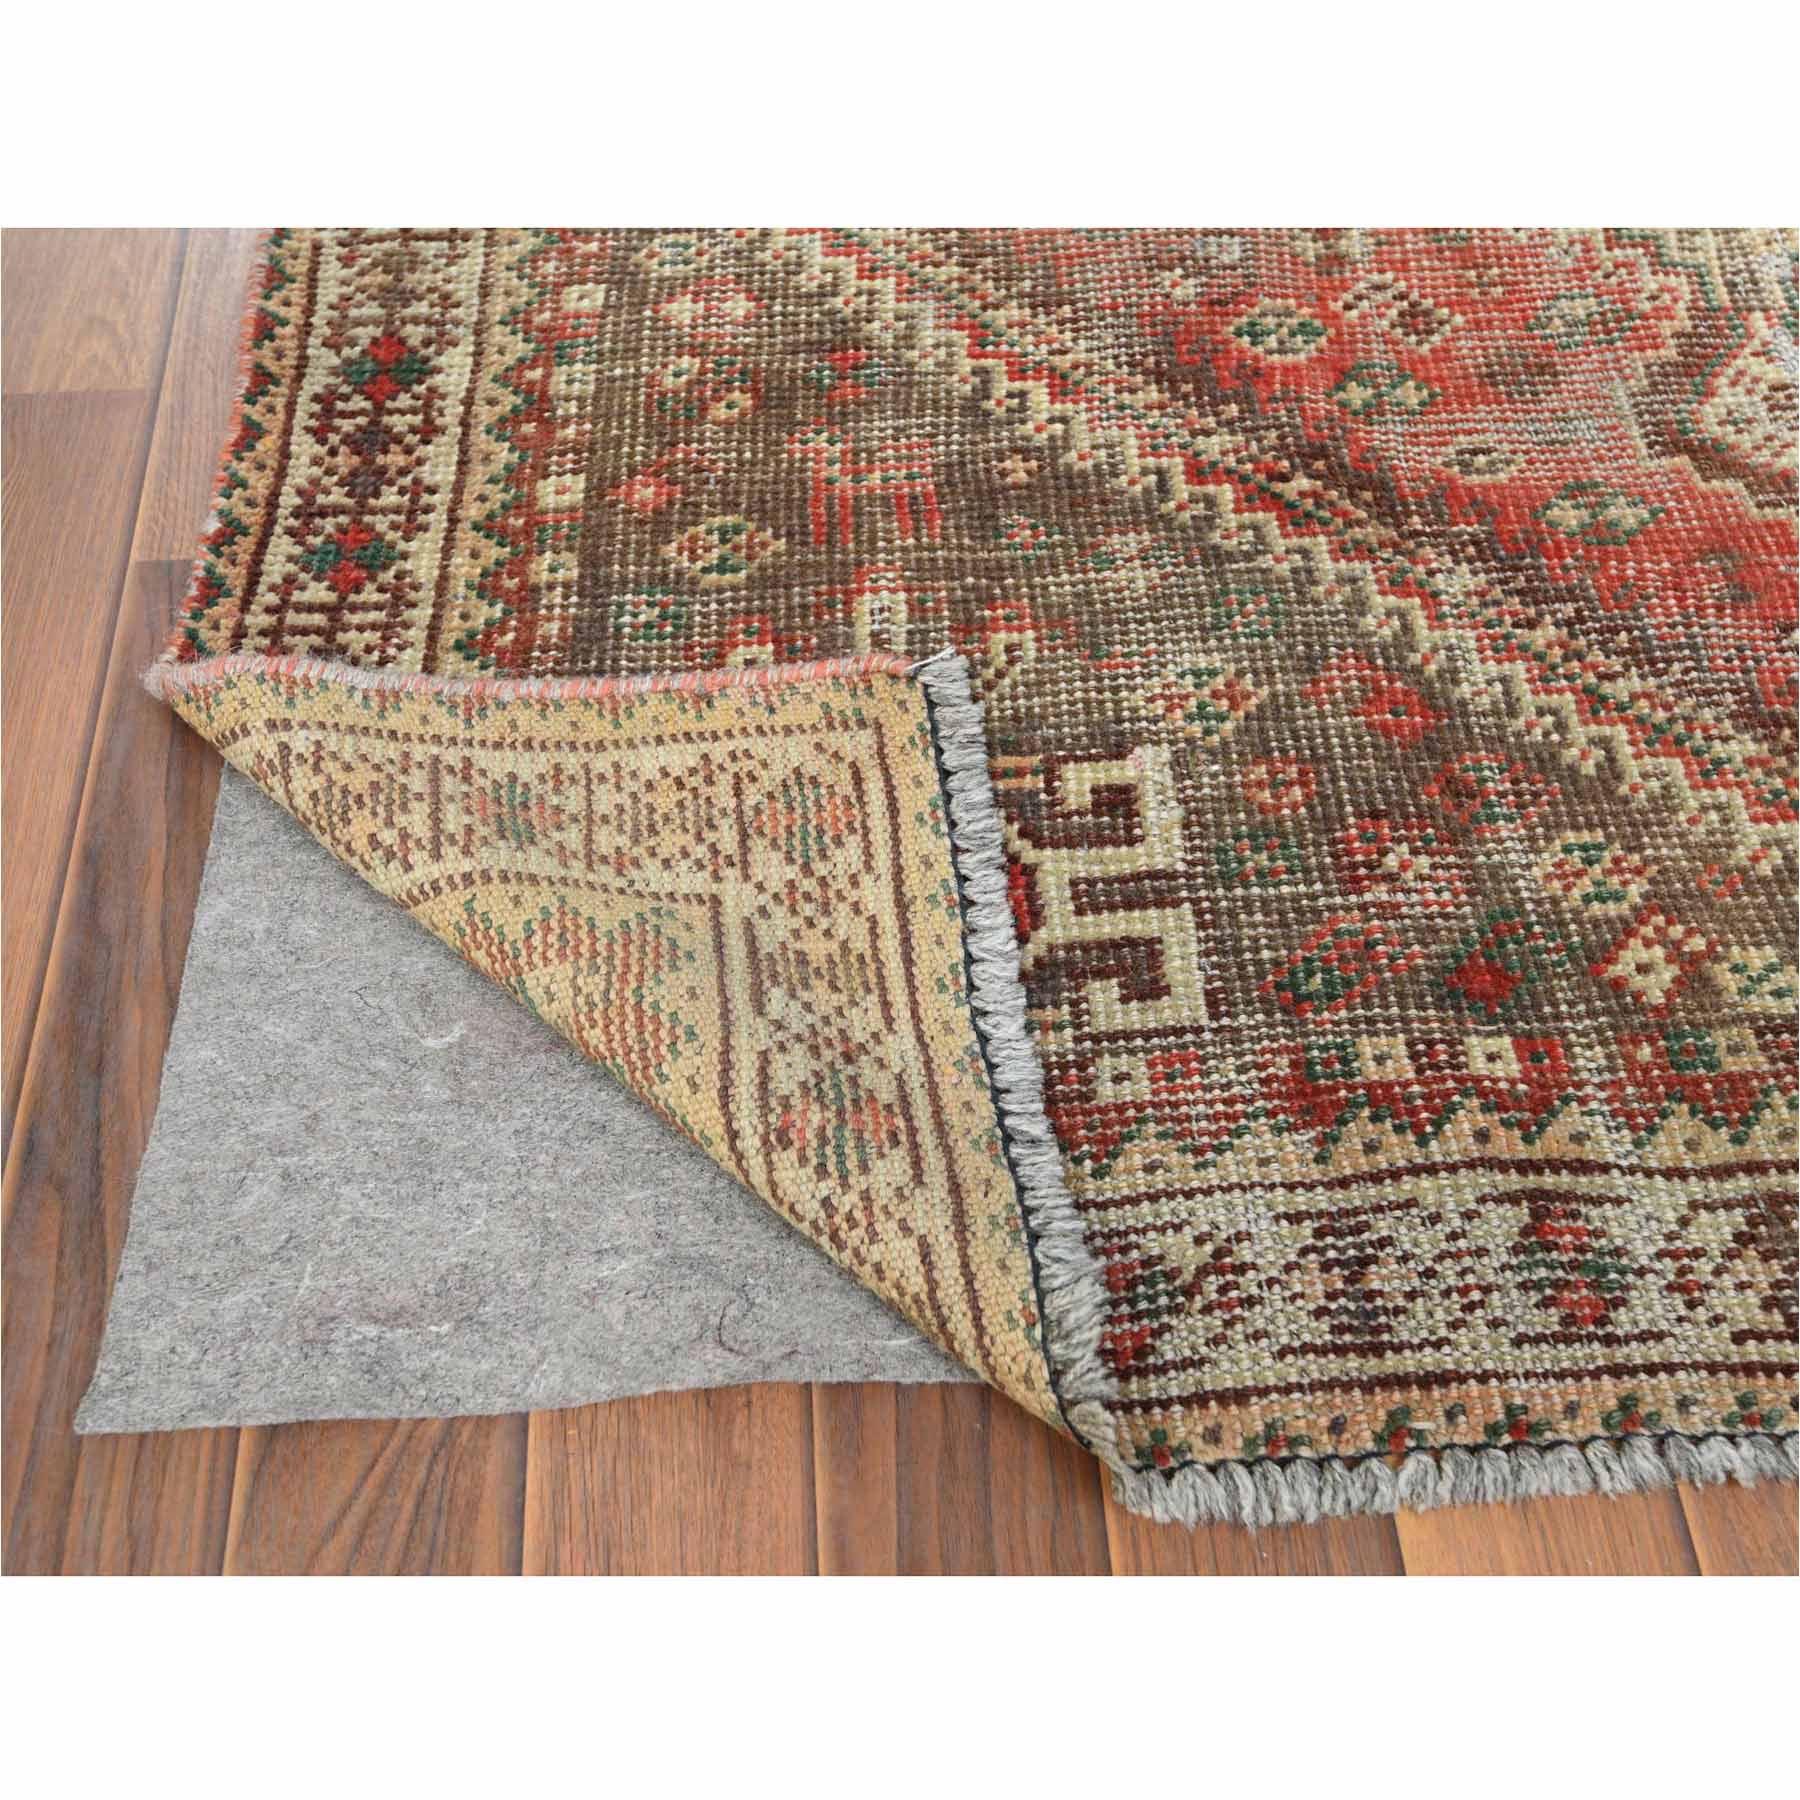 Overdyed-Vintage-Hand-Knotted-Rug-303105